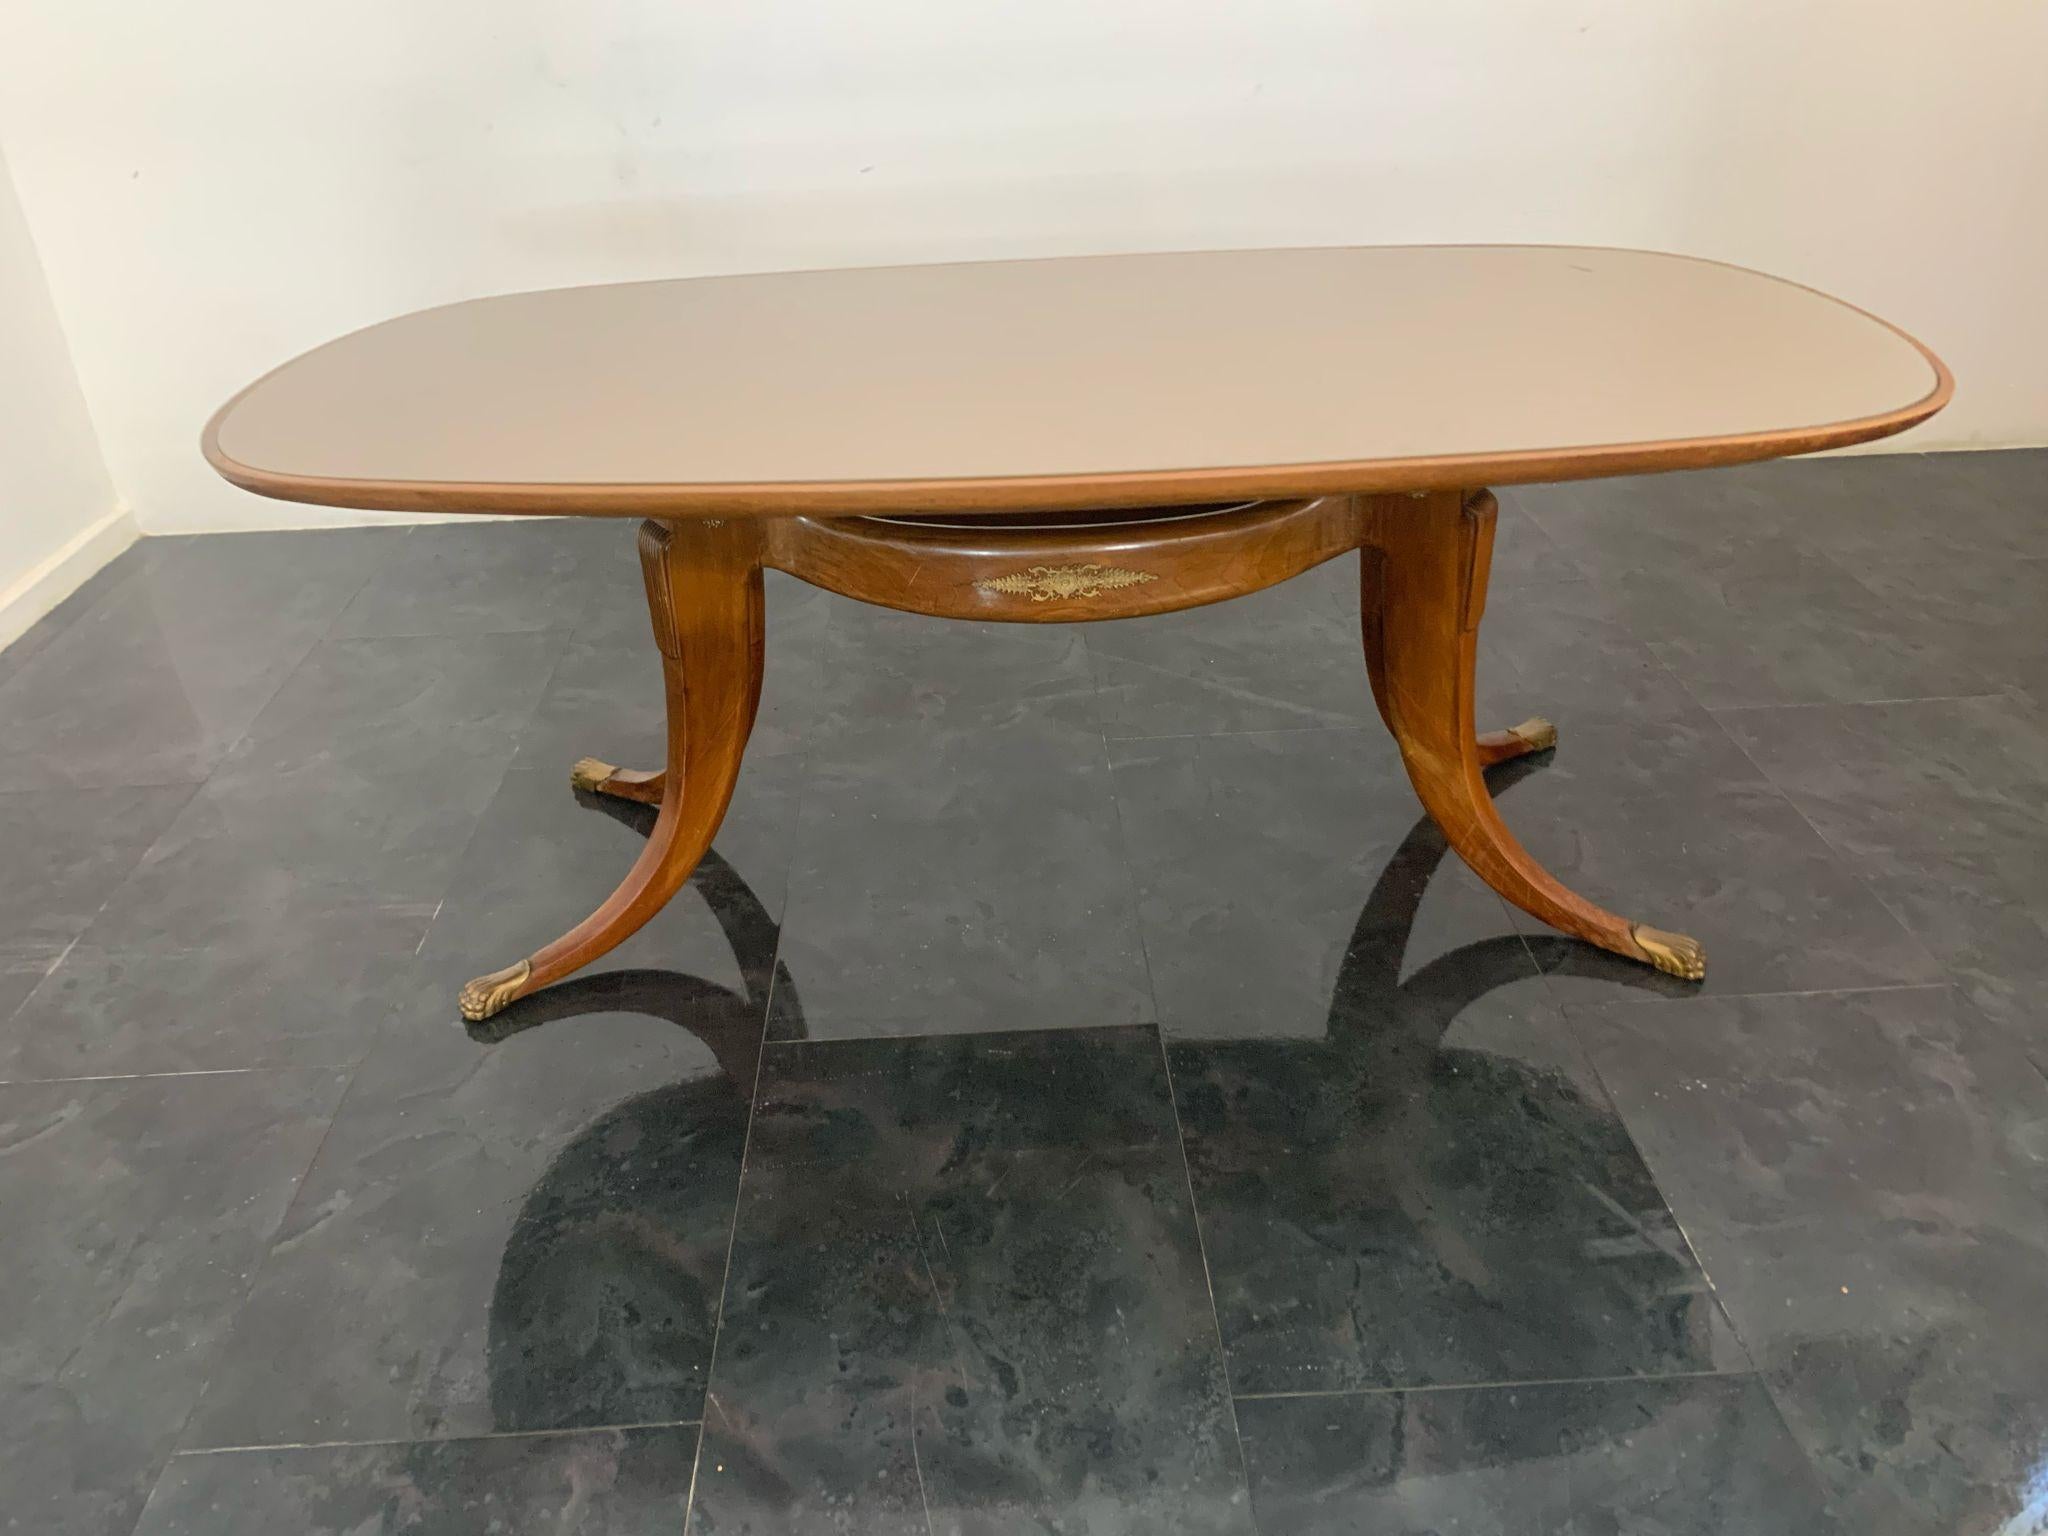 Italian Saber-Leg Table by Paolo Buffa, 1950s For Sale